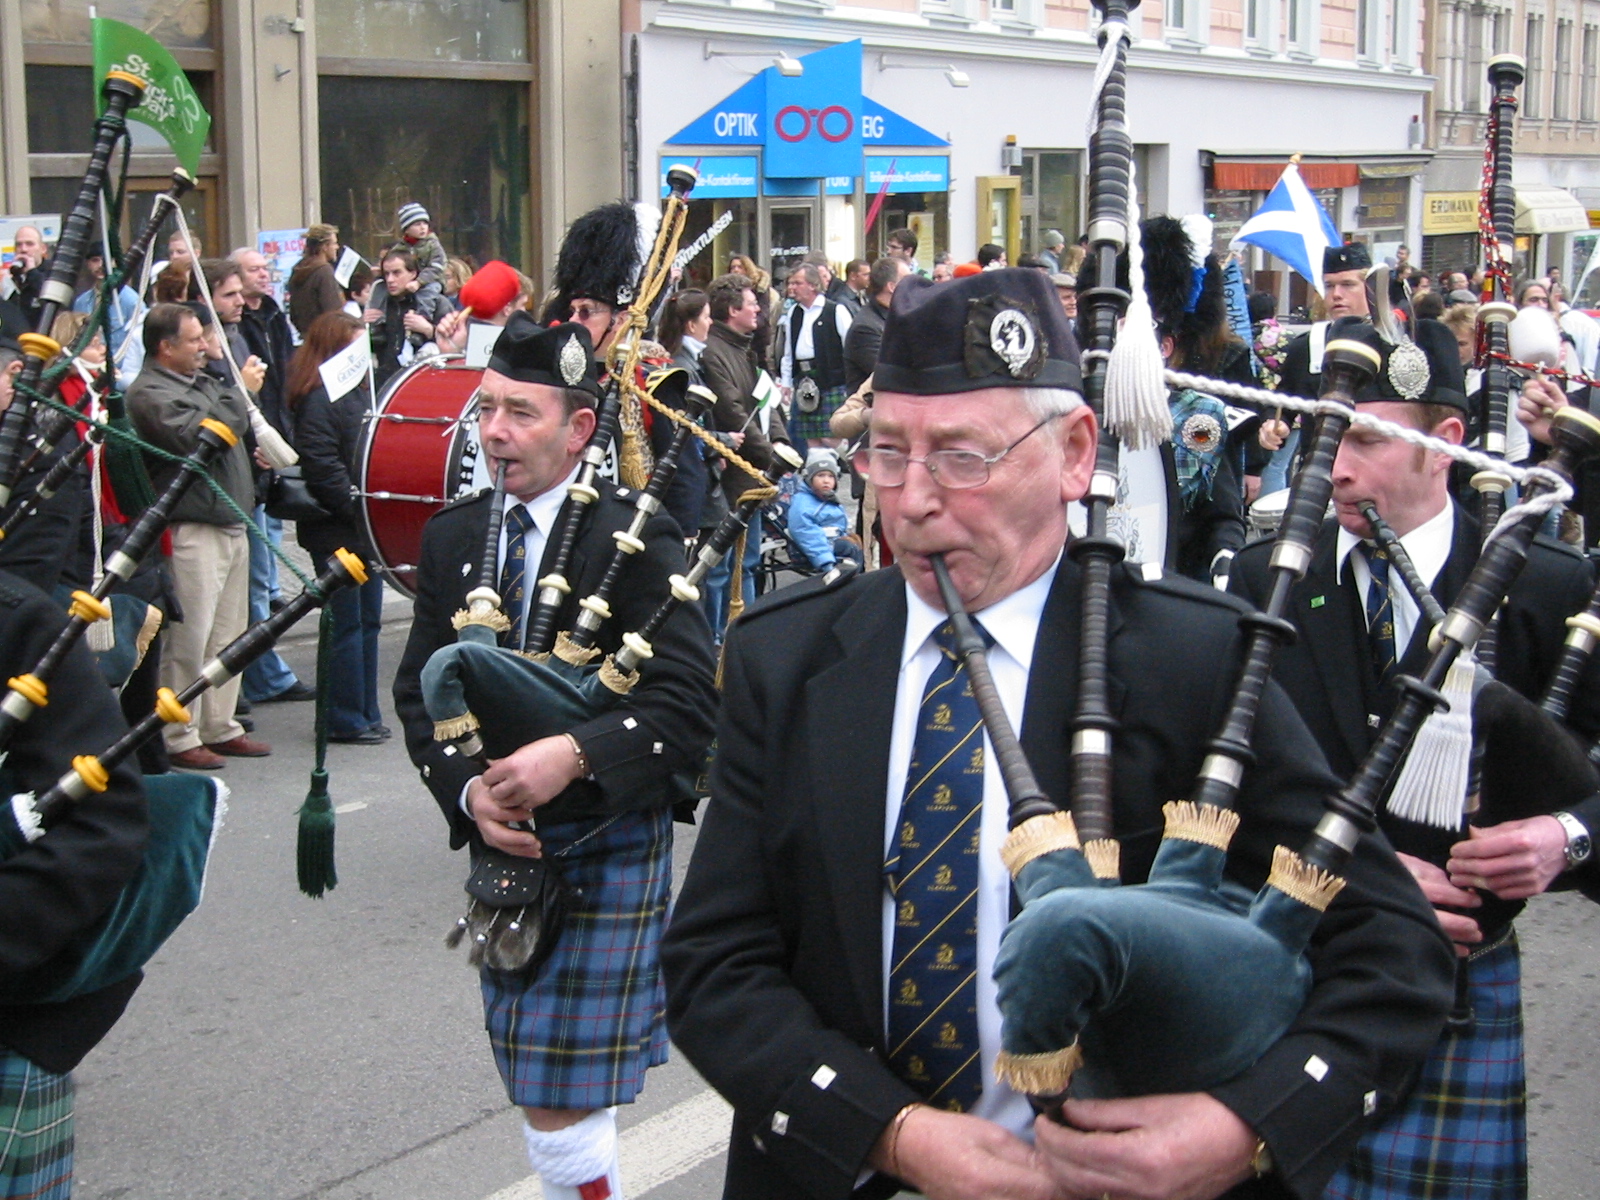 men wearing kilts and playing their bags marching down the street